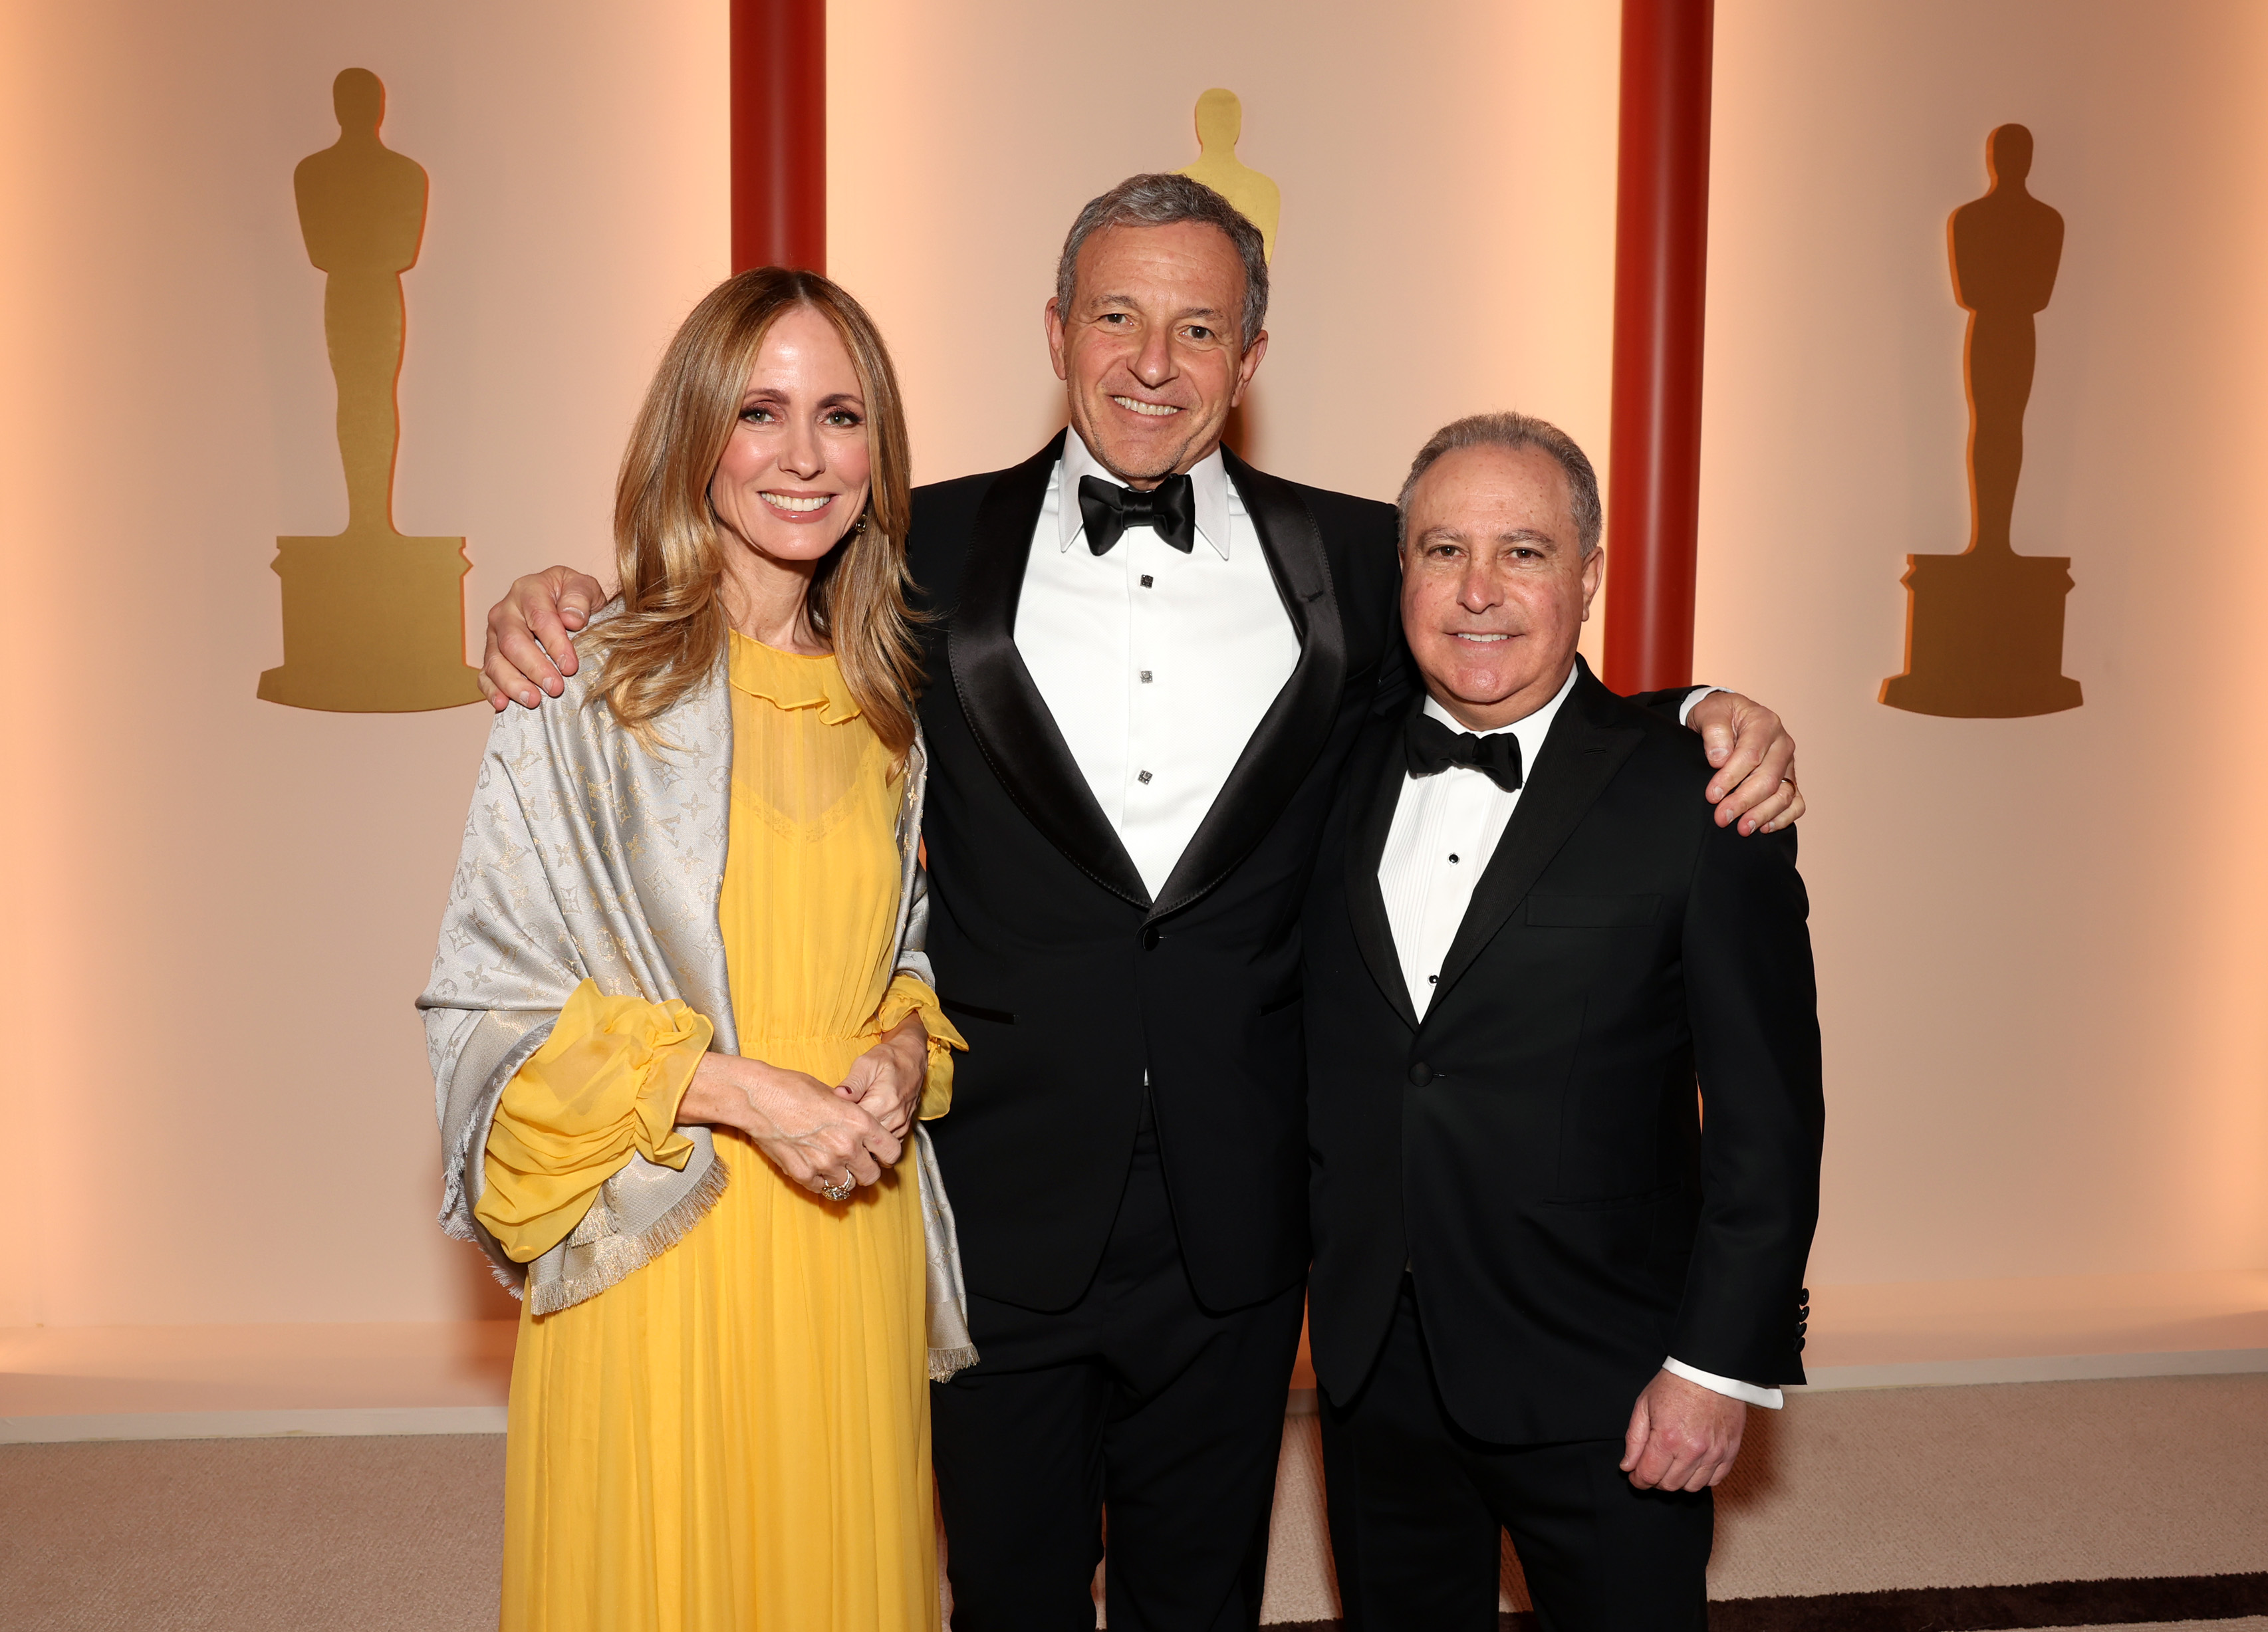 HOLLYWOOD, CALIFORNIA - MARCH 12: (L-R) Dana Walden, The Walt Disney Company CEO Bob Iger and Alan Bergman, Co-Chairman, Disney Entertainment attend the 95th Annual Academy Awards on March 12, 2023 in Hollywood, California. (Photo by Jesse Grant/Getty Images)